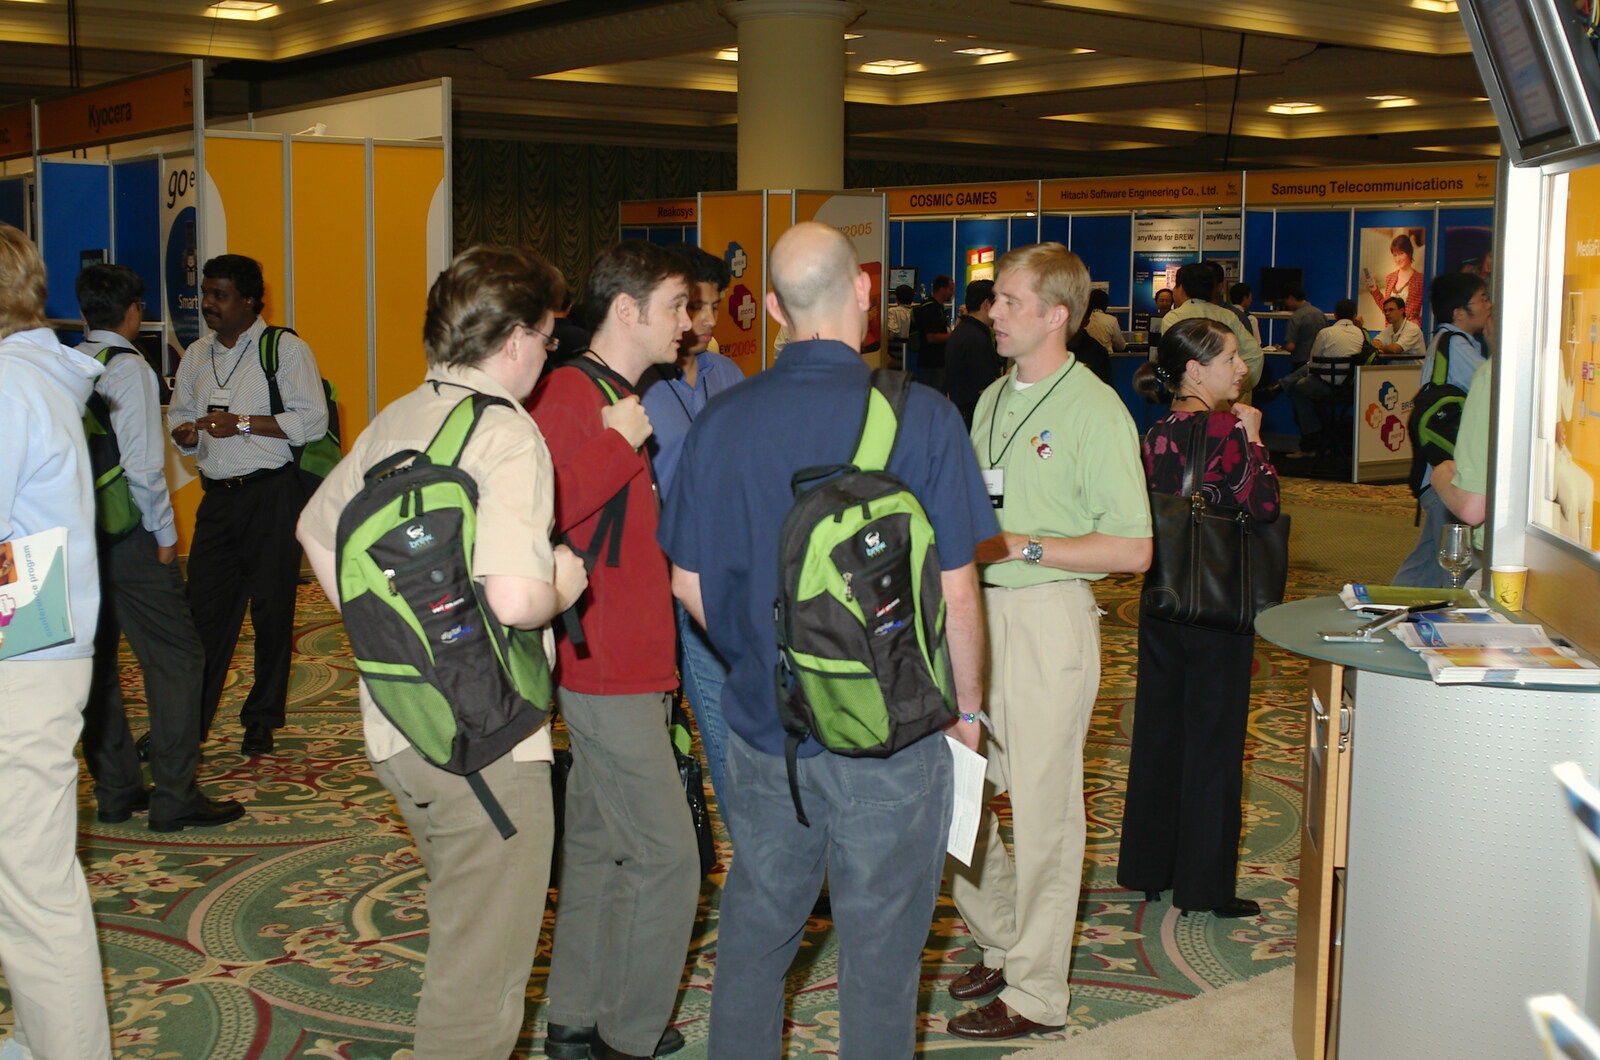 Delegates and official Qualcomm backpacks from The BREW Developers Conference, San Diego, California - 2nd June 2005